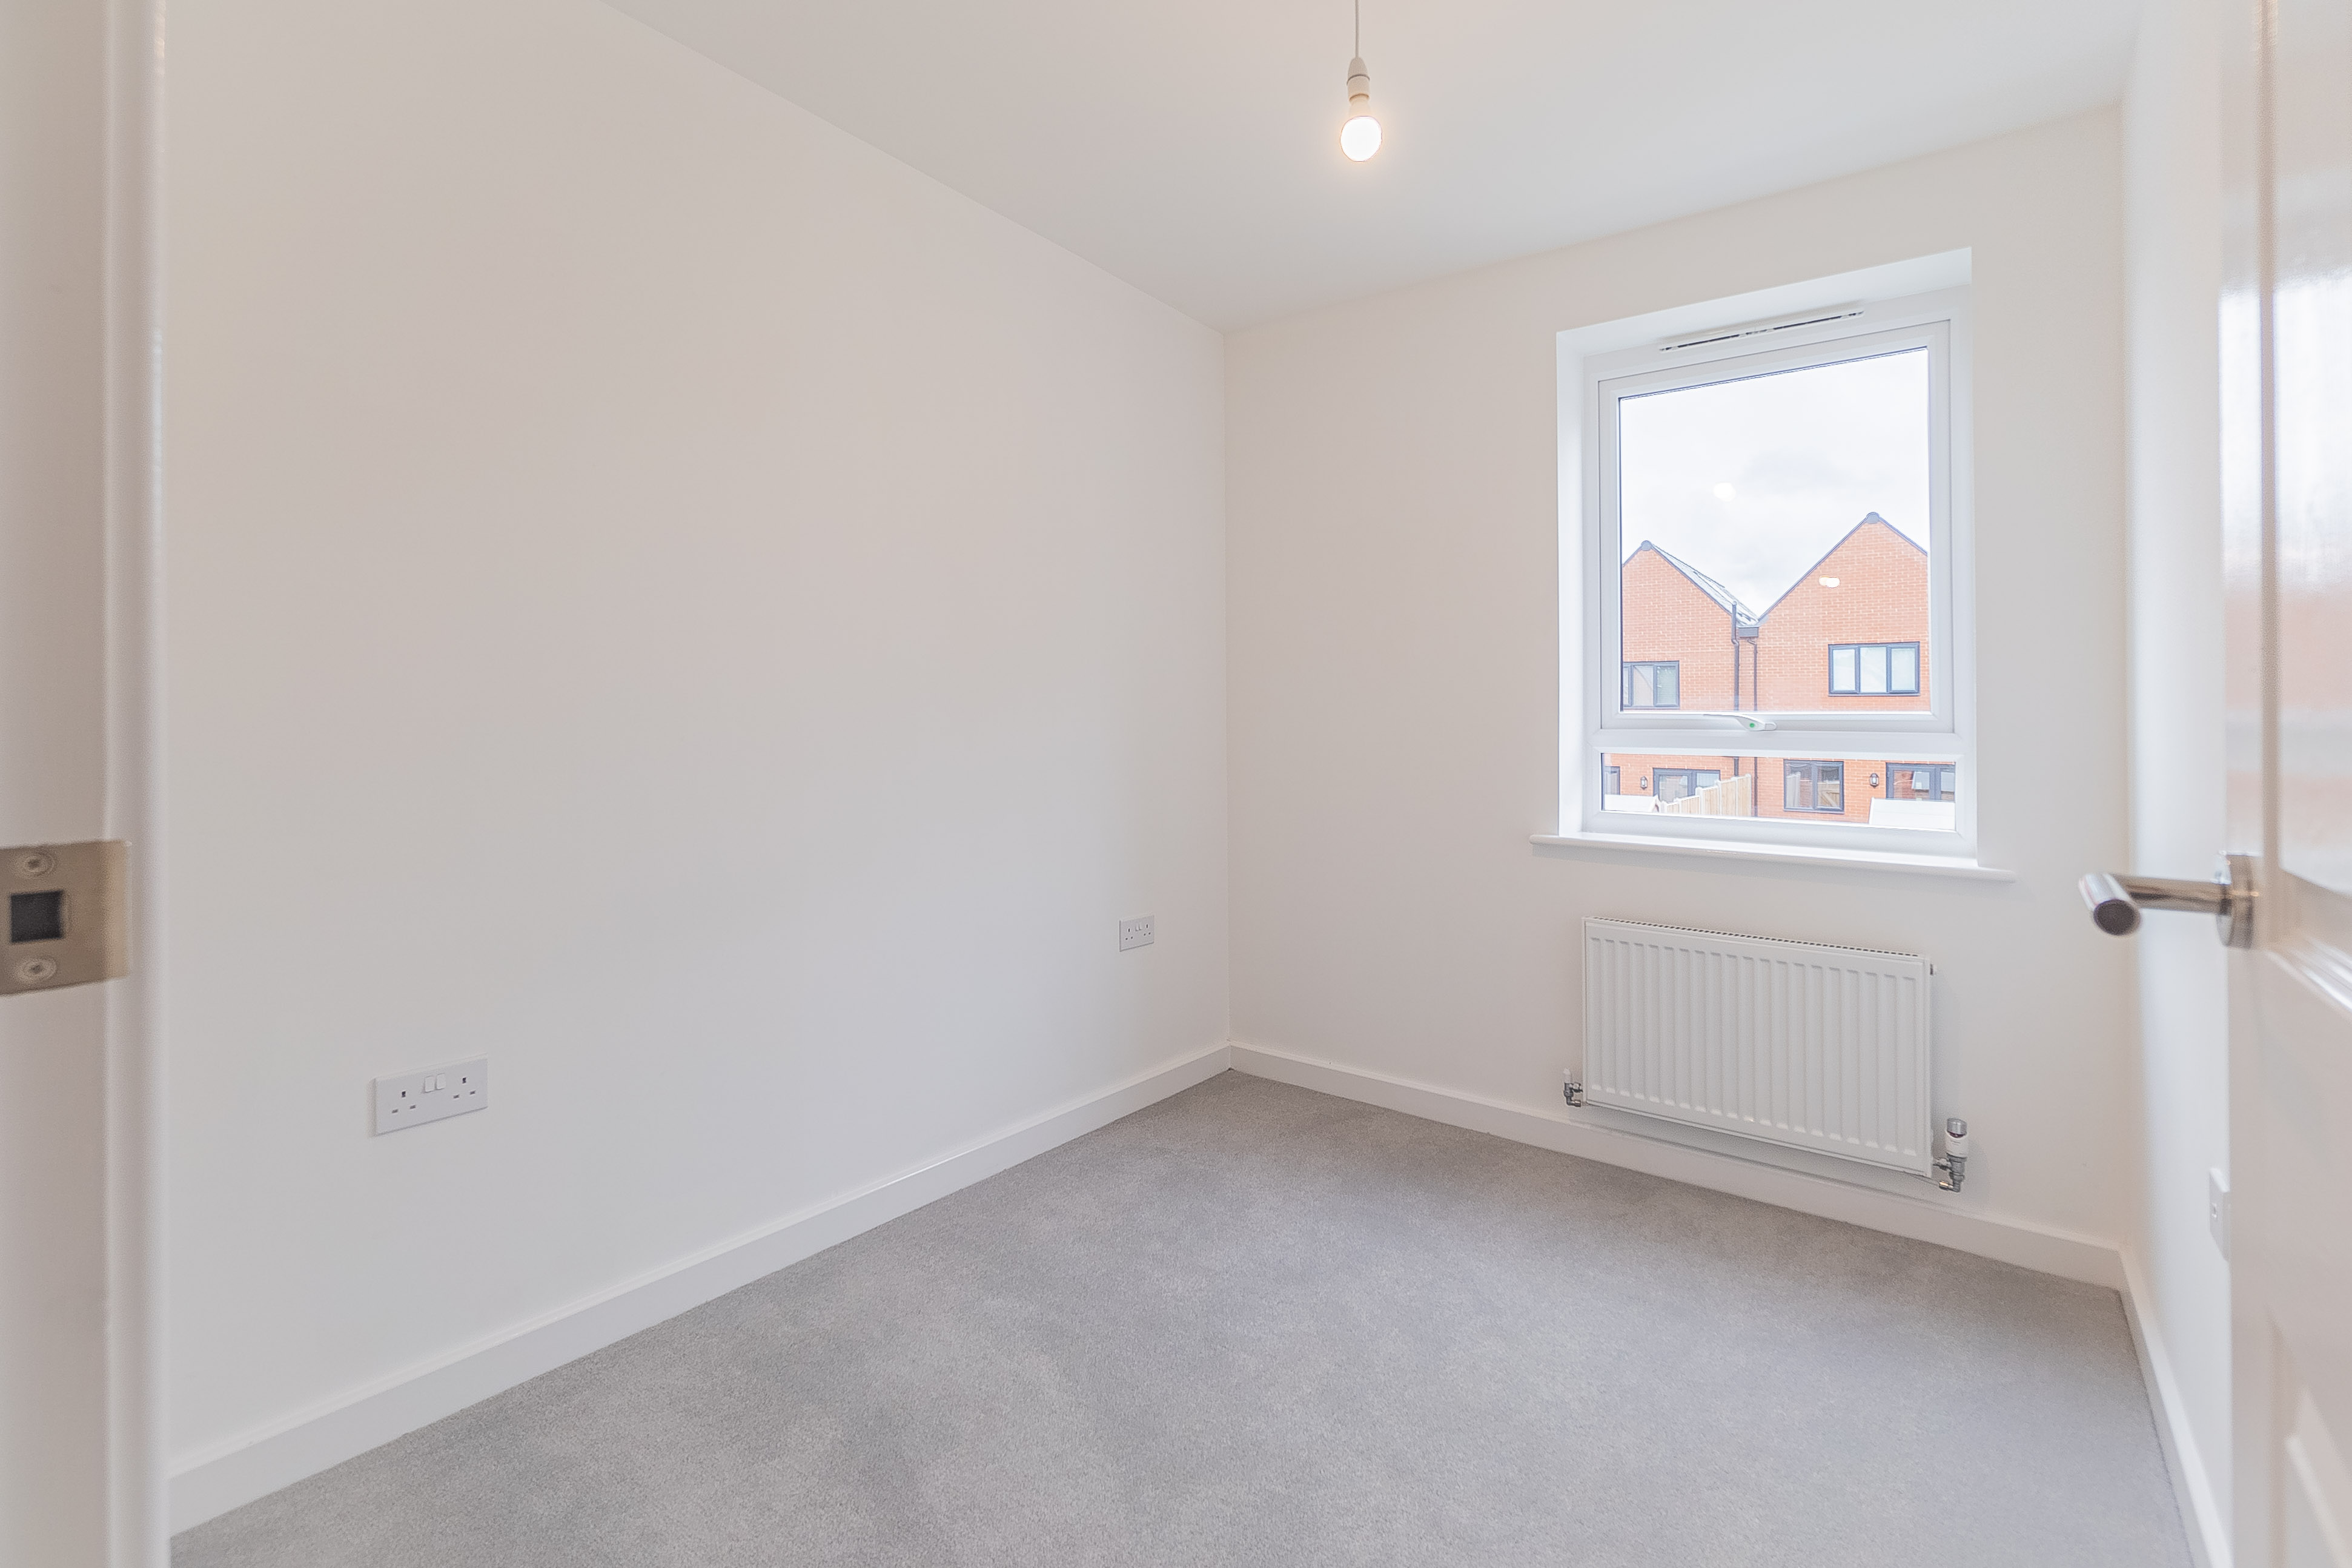 Bedroom of a 3 Bedroom House at Whiteley Meadow available for Shared Ownership